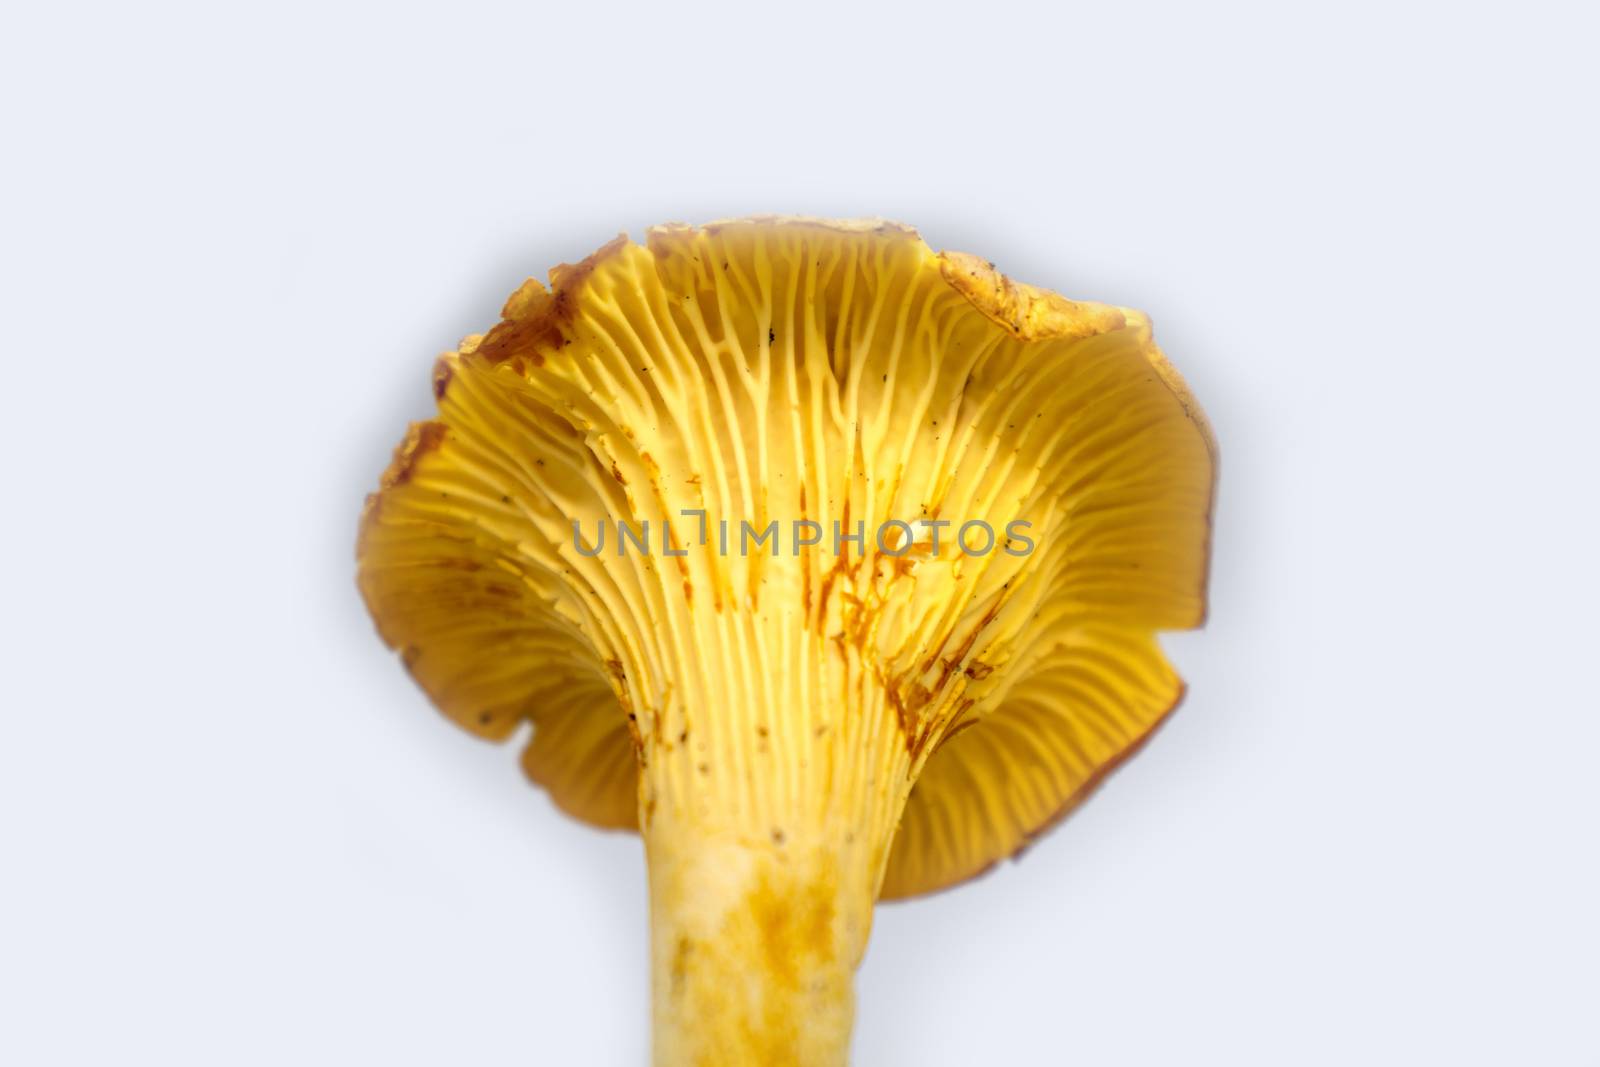 yellow mushroom isolated on white background by Andreajk3